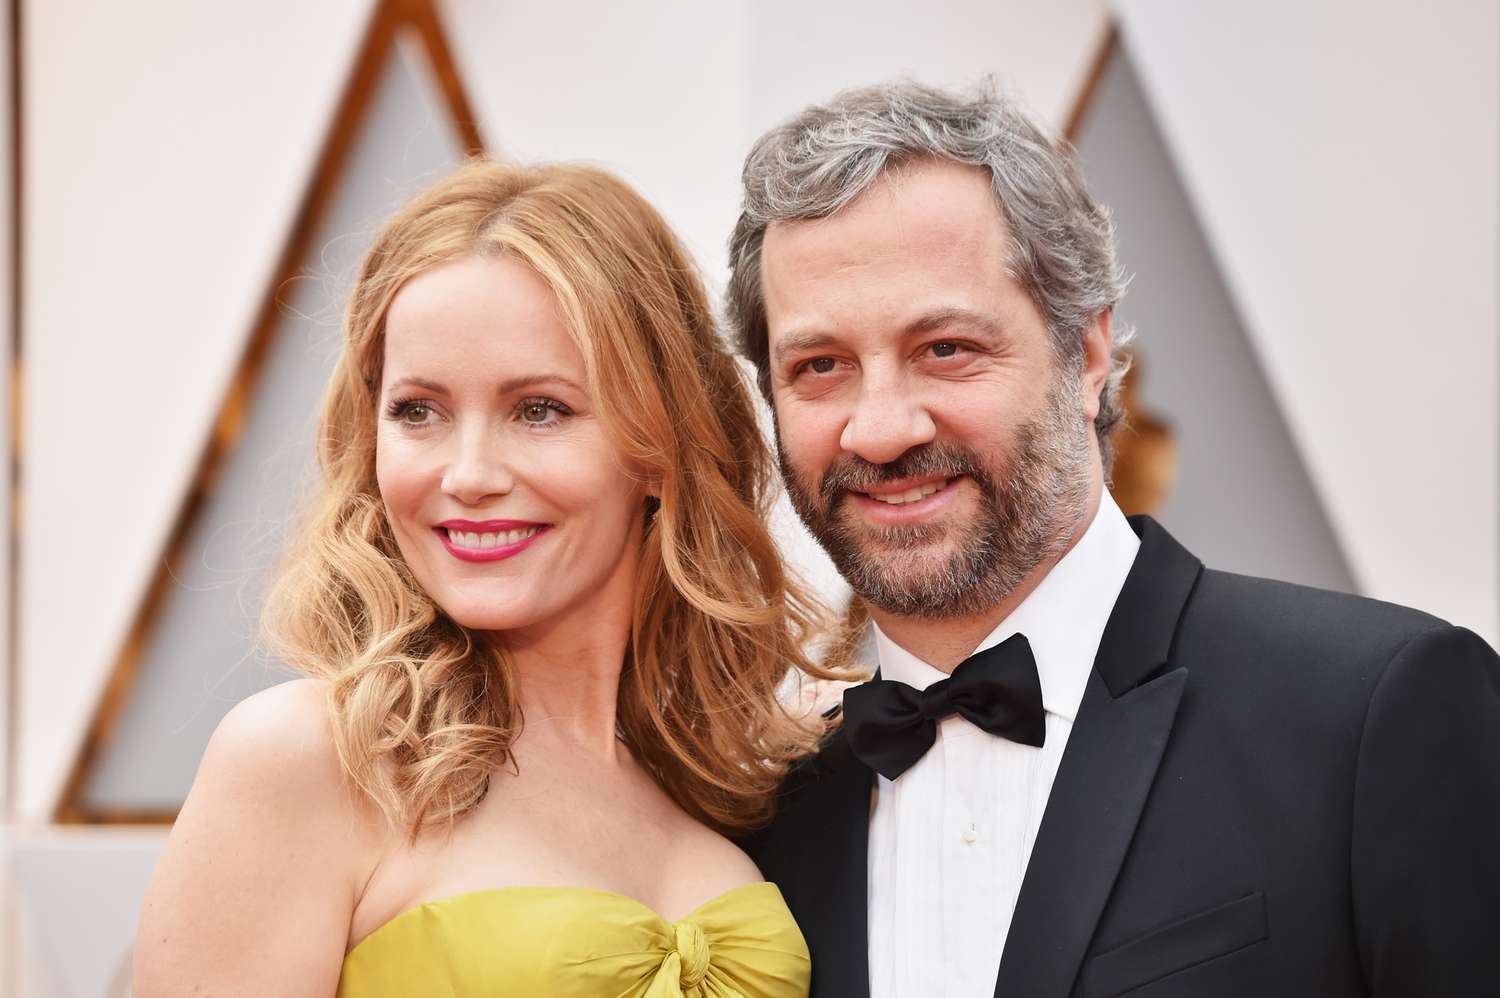 Apatow